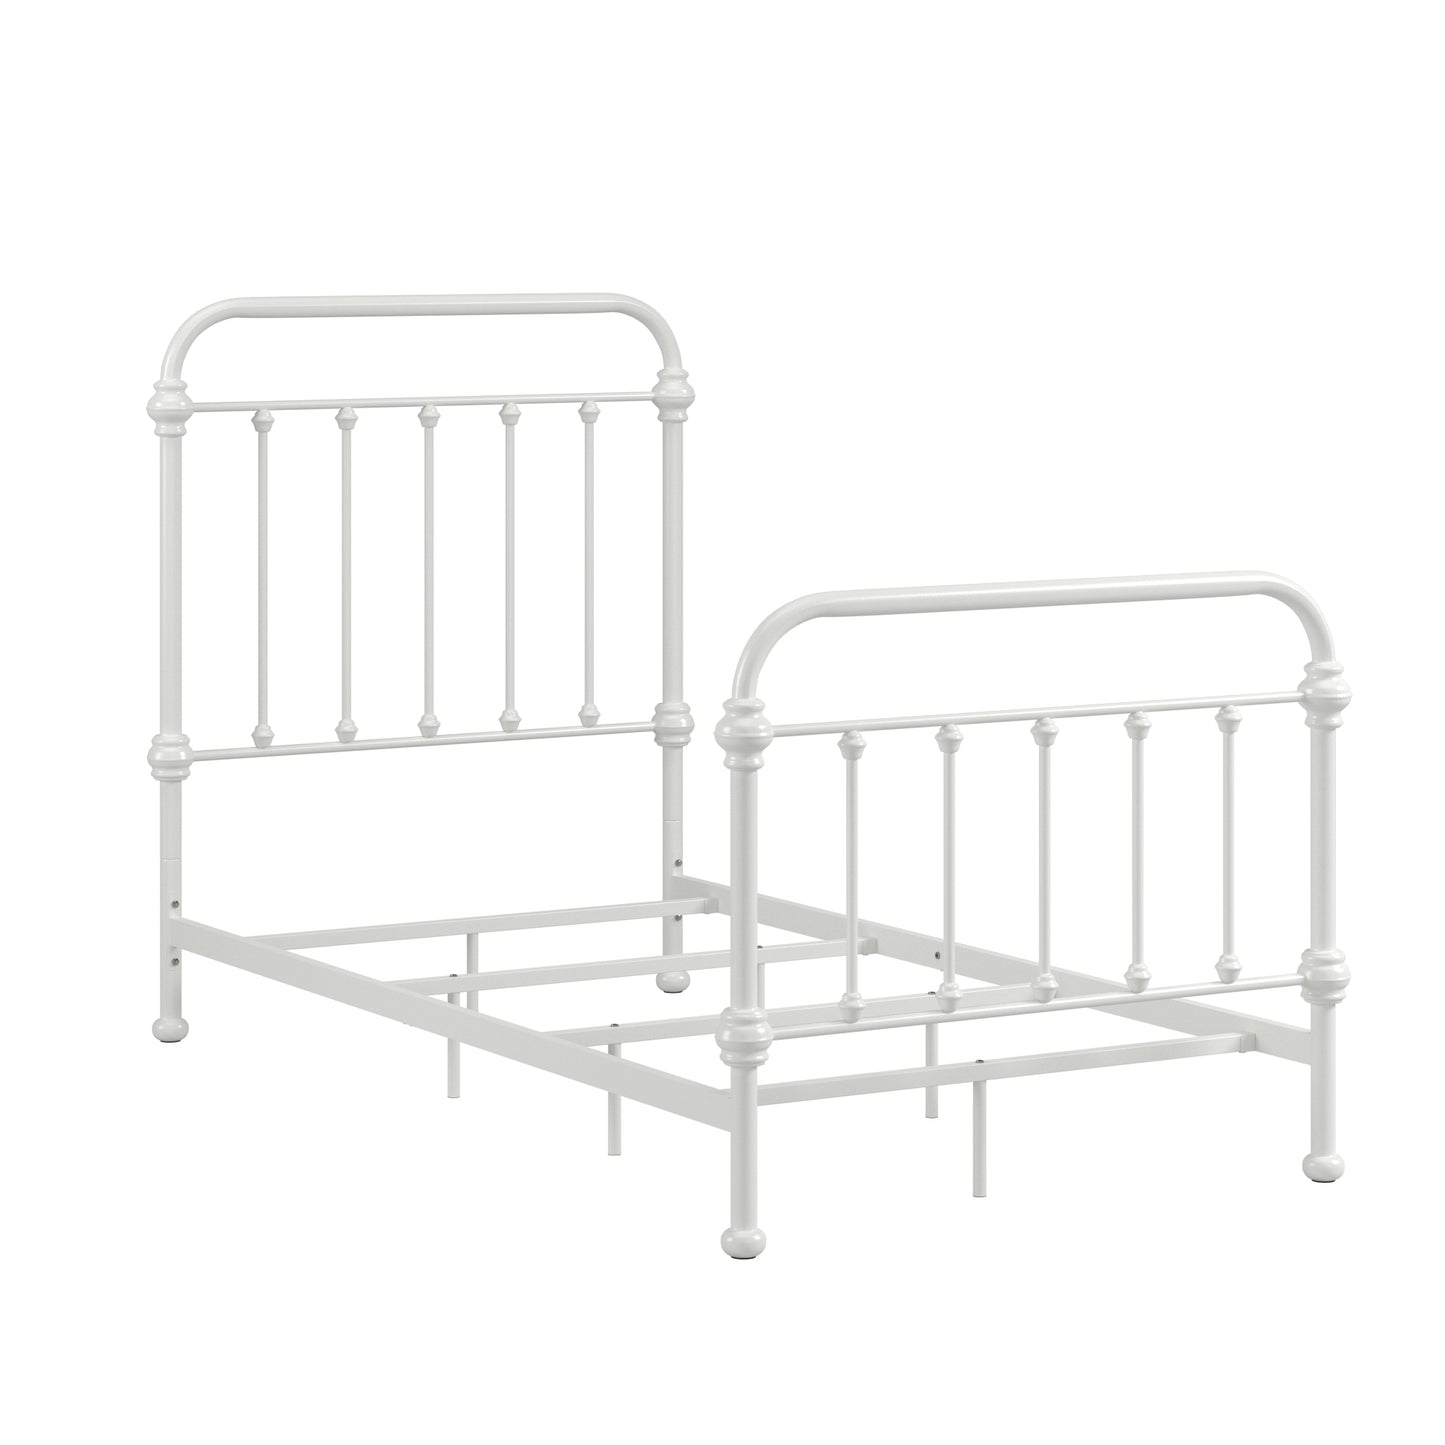 Antique Graceful Victorian Iron Metal Bed - Antique White, Twin (Twin Size)